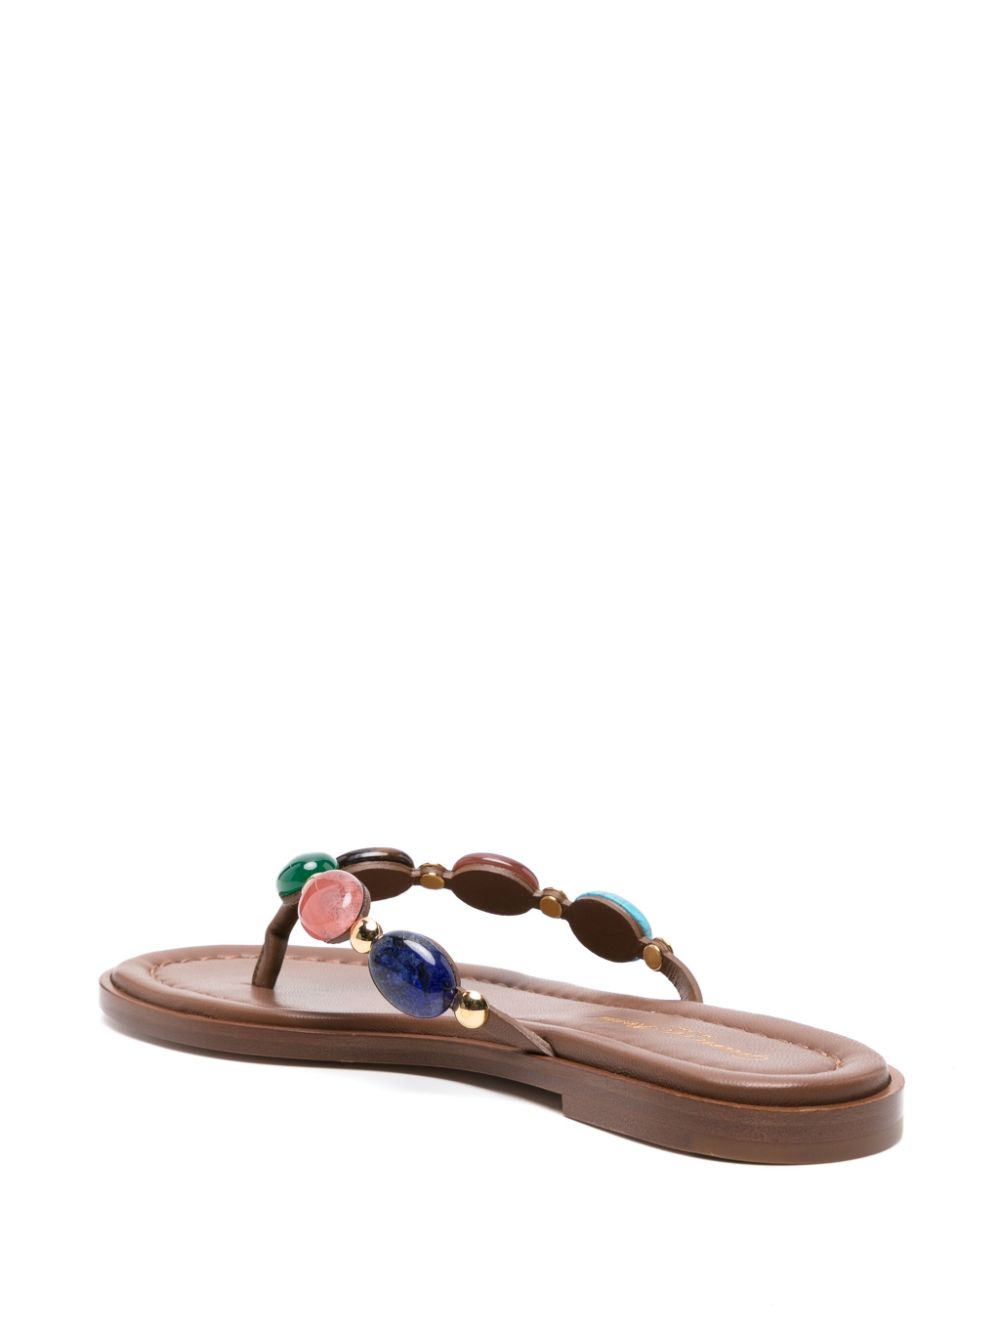 GIANVITO ROSSI Crystal-Embellished Thong Sandals for Women in Leather Brown